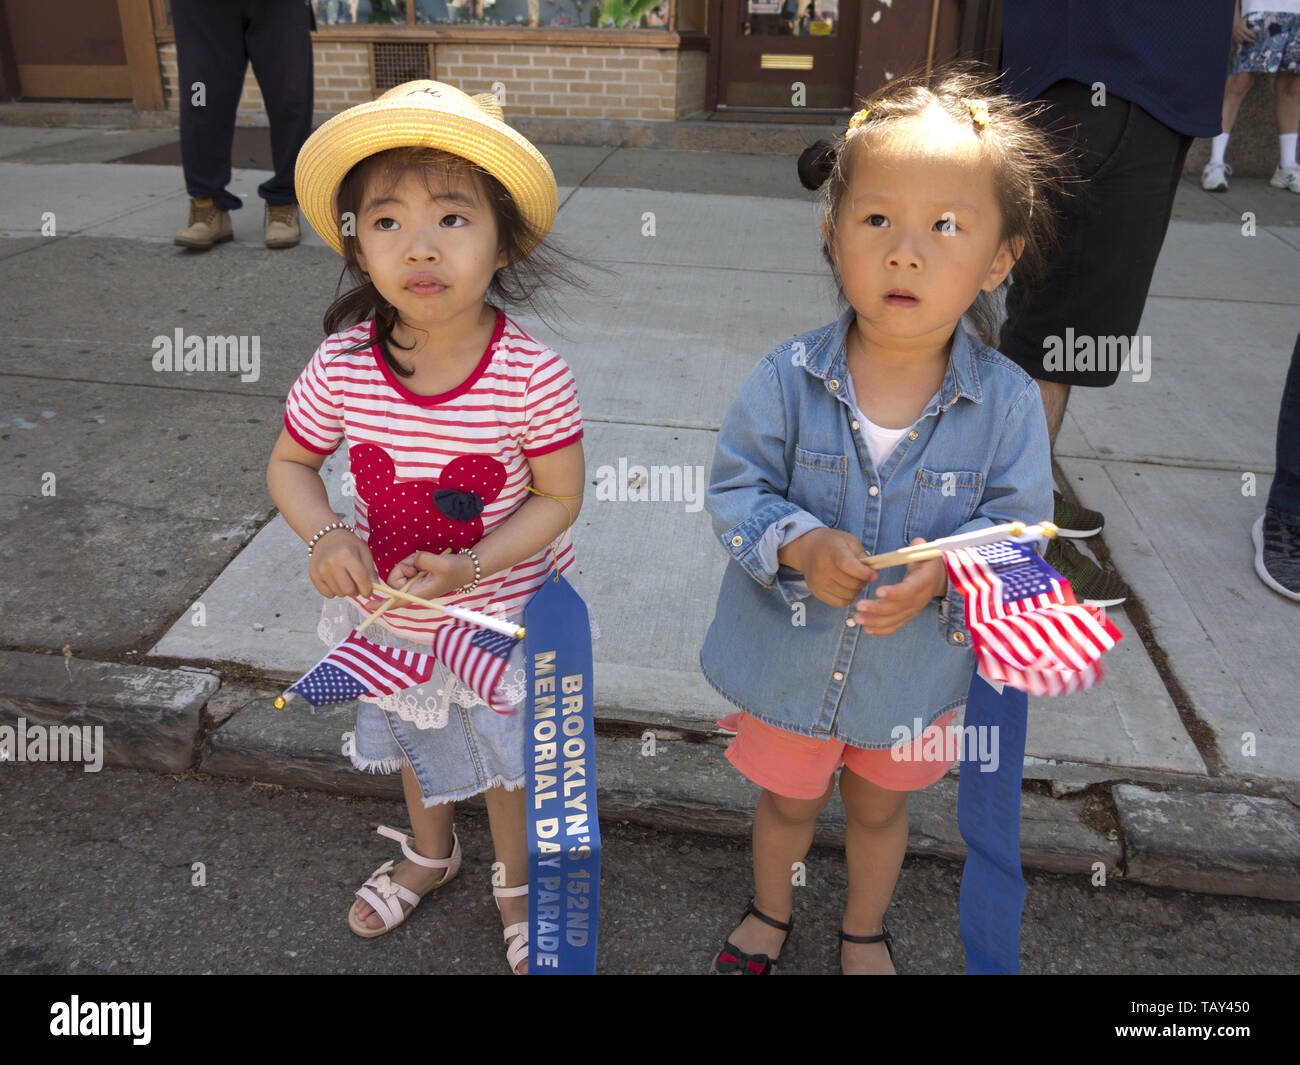 Young, Chinese girls watch The Kings County 152nd Memorial Parade in the Bay Ridge section of Brooklyn, NY, May 27, 20019. Stock Photo